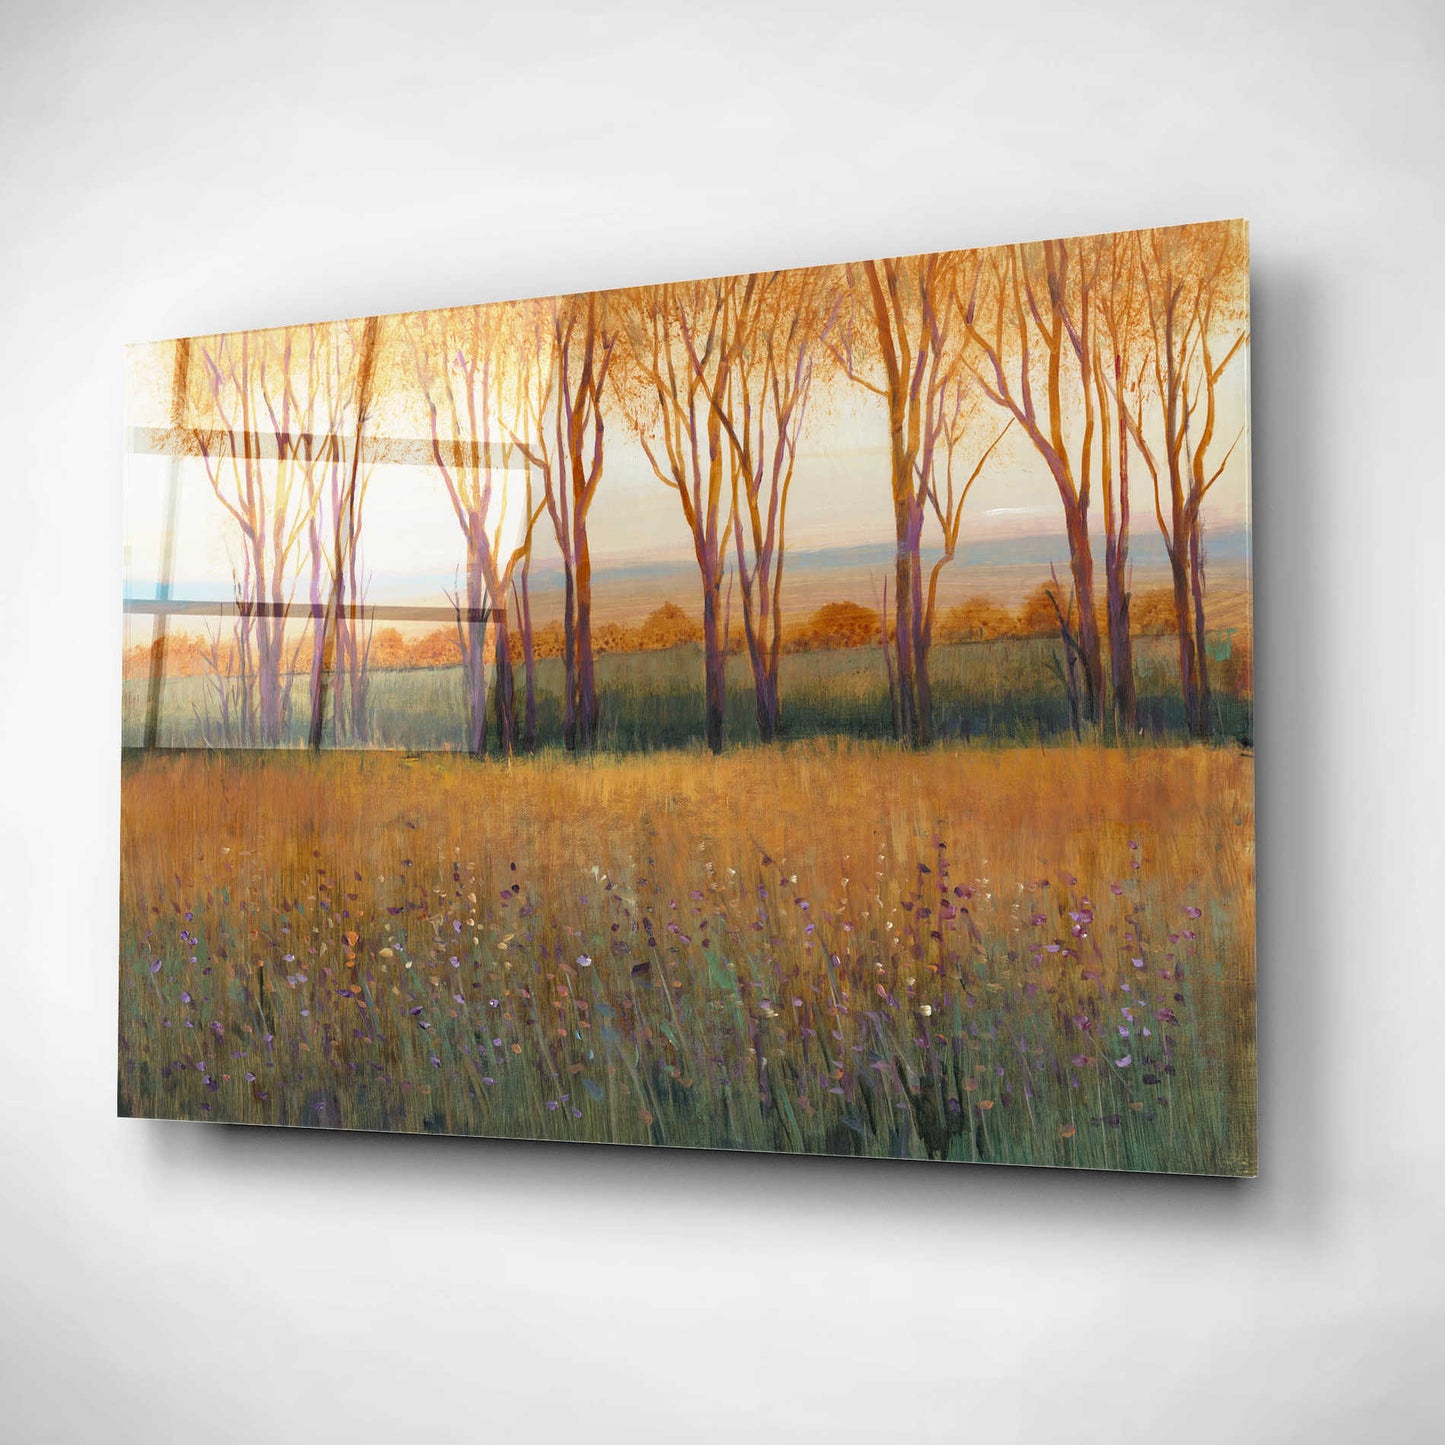 Epic Art 'Glow in the Afternoon II' by Tim O'Toole, Acrylic Glass Wall Art,16x12